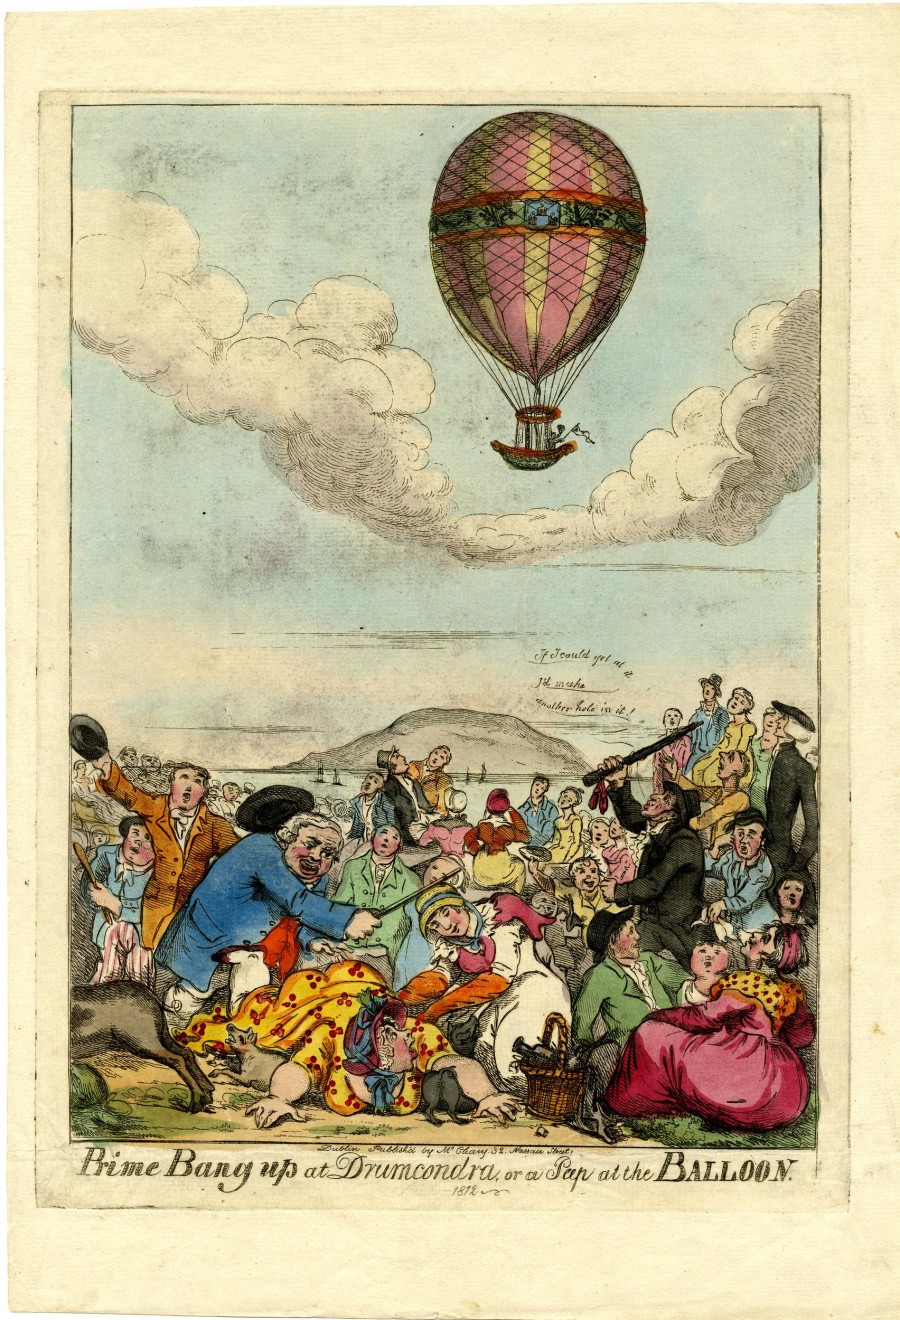 Titled ‘Prime bang up in Drumcondra’ this satirical cartoon shows the ascent of James Sadler (father of Windham) from Belvedere House in Drumcondra, Dublin in 1812. The Duke and Duchess of Richmond were present. Credit: British Museum